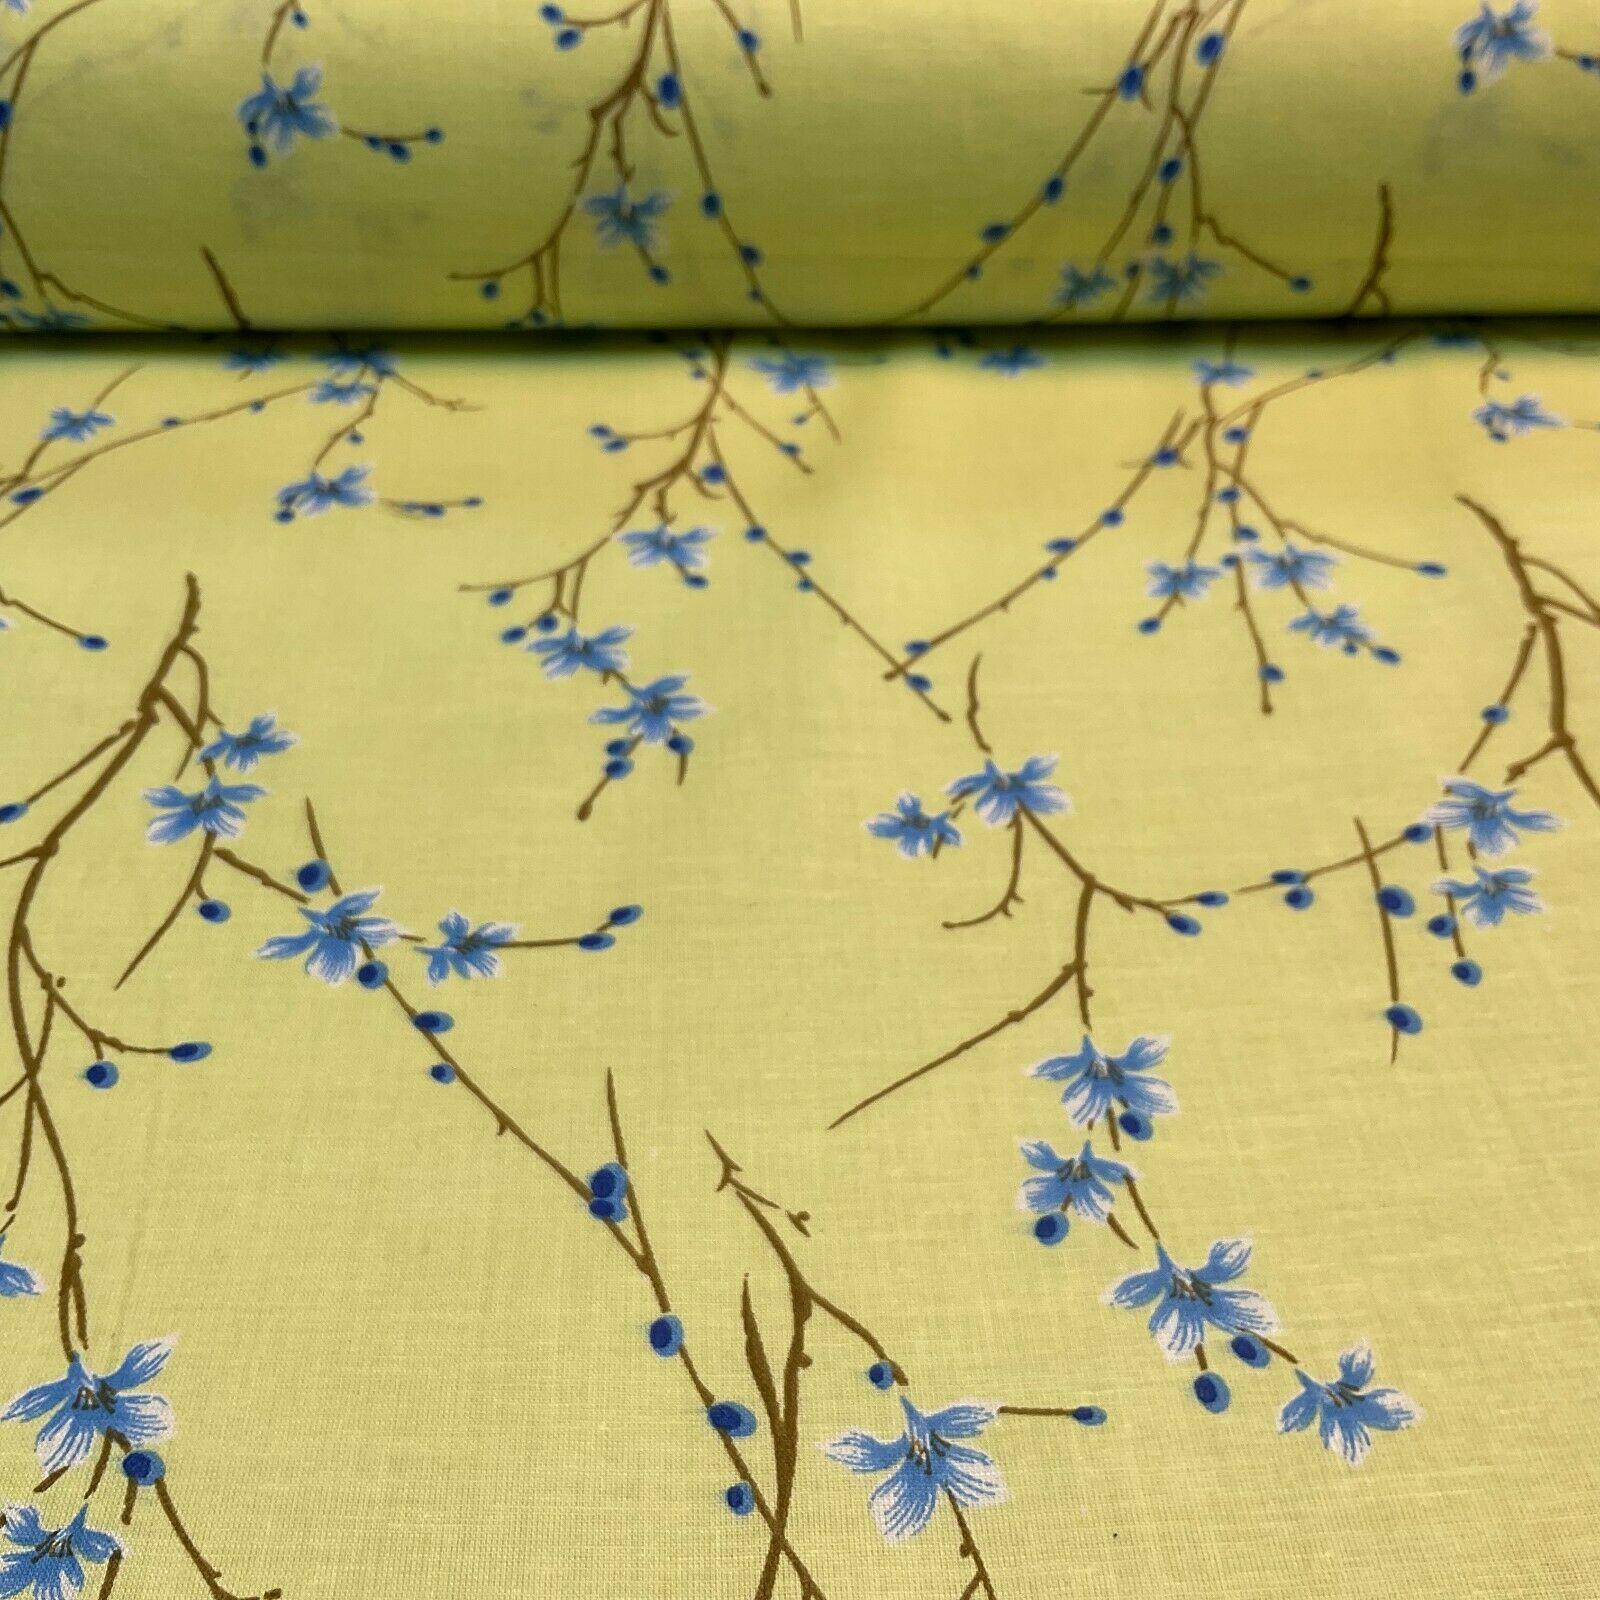 Cotton Lawn Summer Floral dot Printed Dress fabric 111cm wide M1605